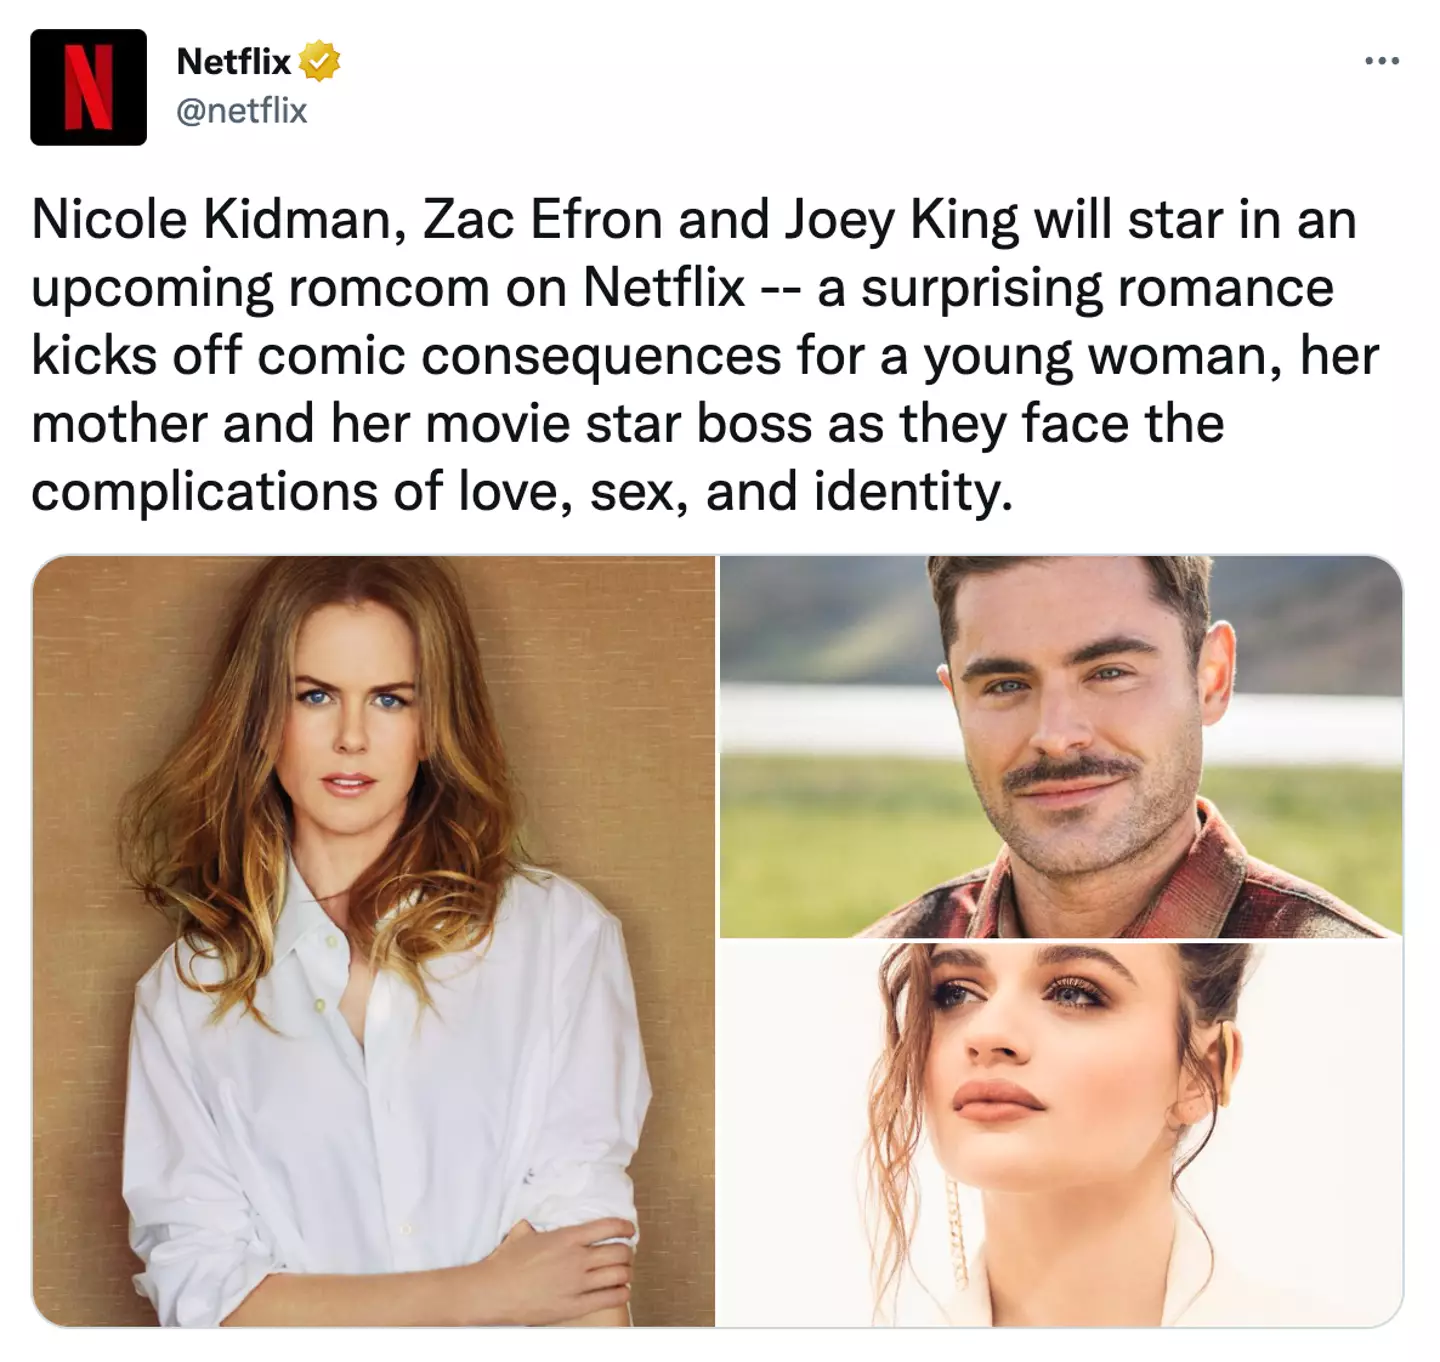 A Family Affair is set to arrive on Netflix in 2023.